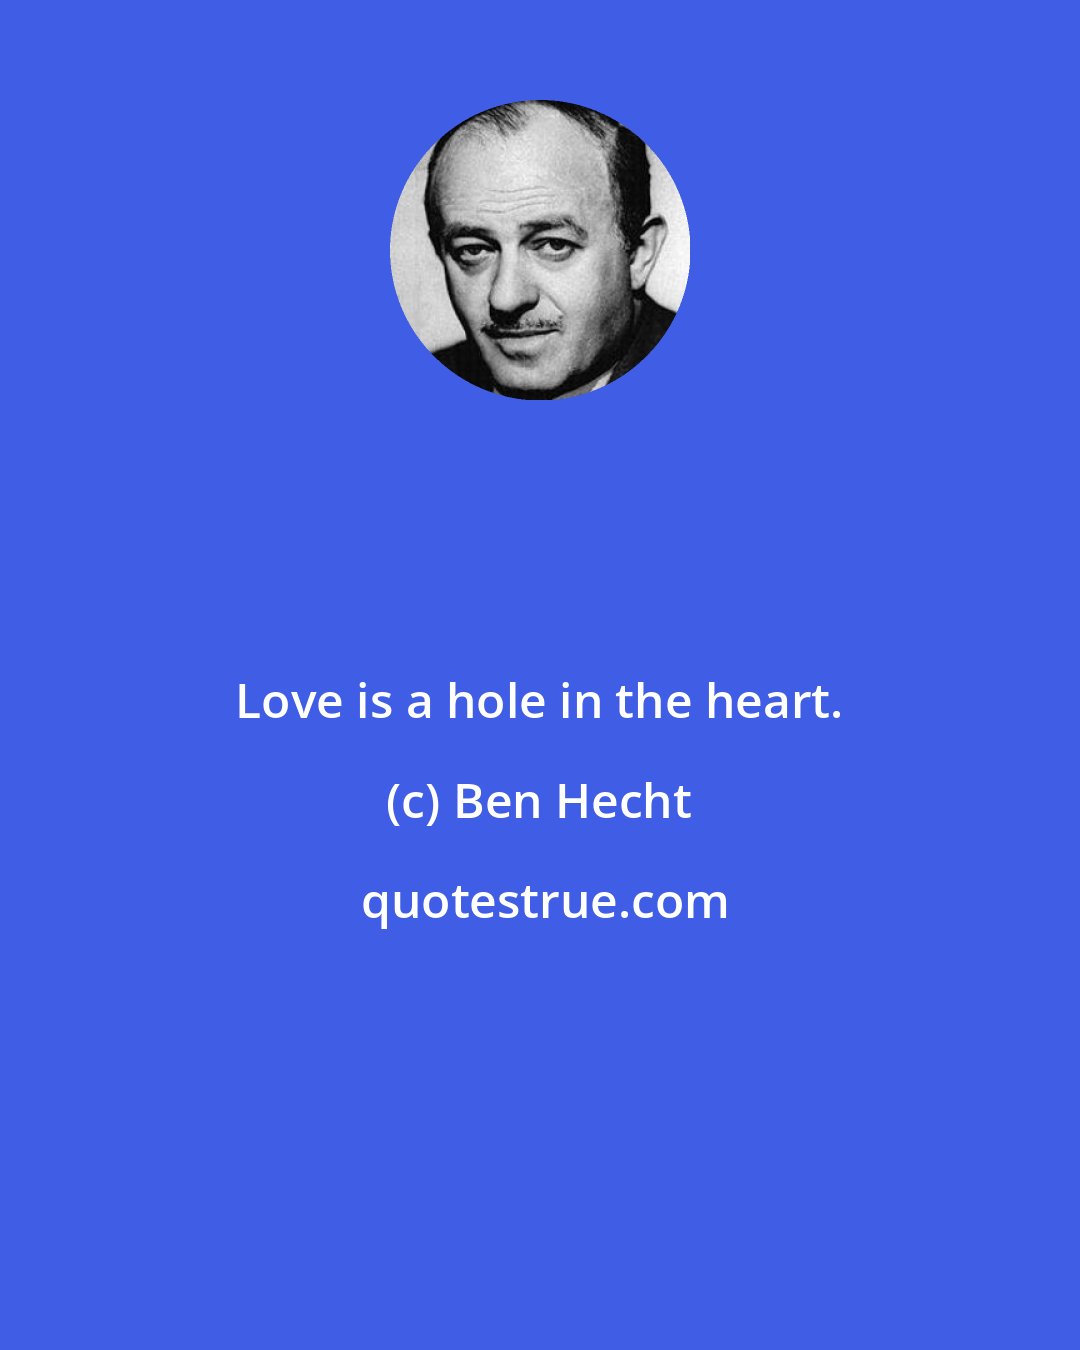 Ben Hecht: Love is a hole in the heart.